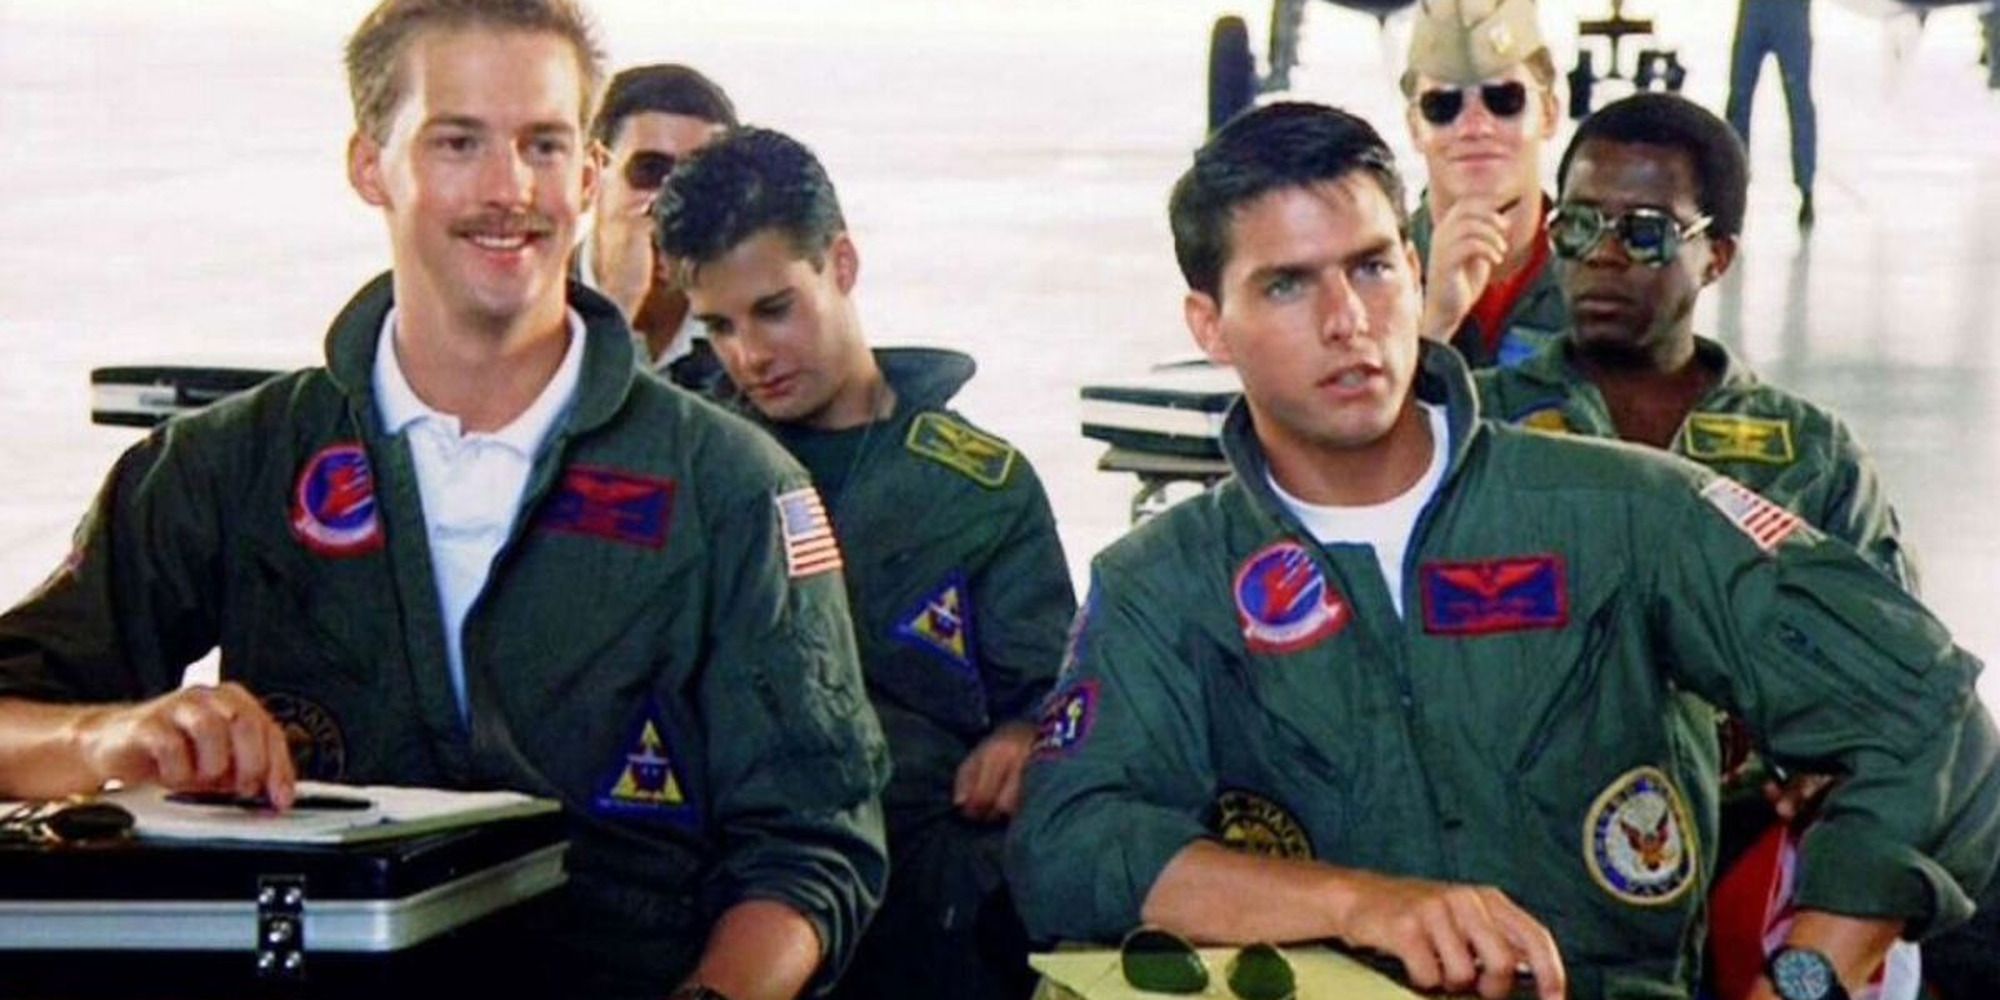 Maverick (Tom Cruise) and Goose (Anthony Edwards) from Top Gun sitting at their desks